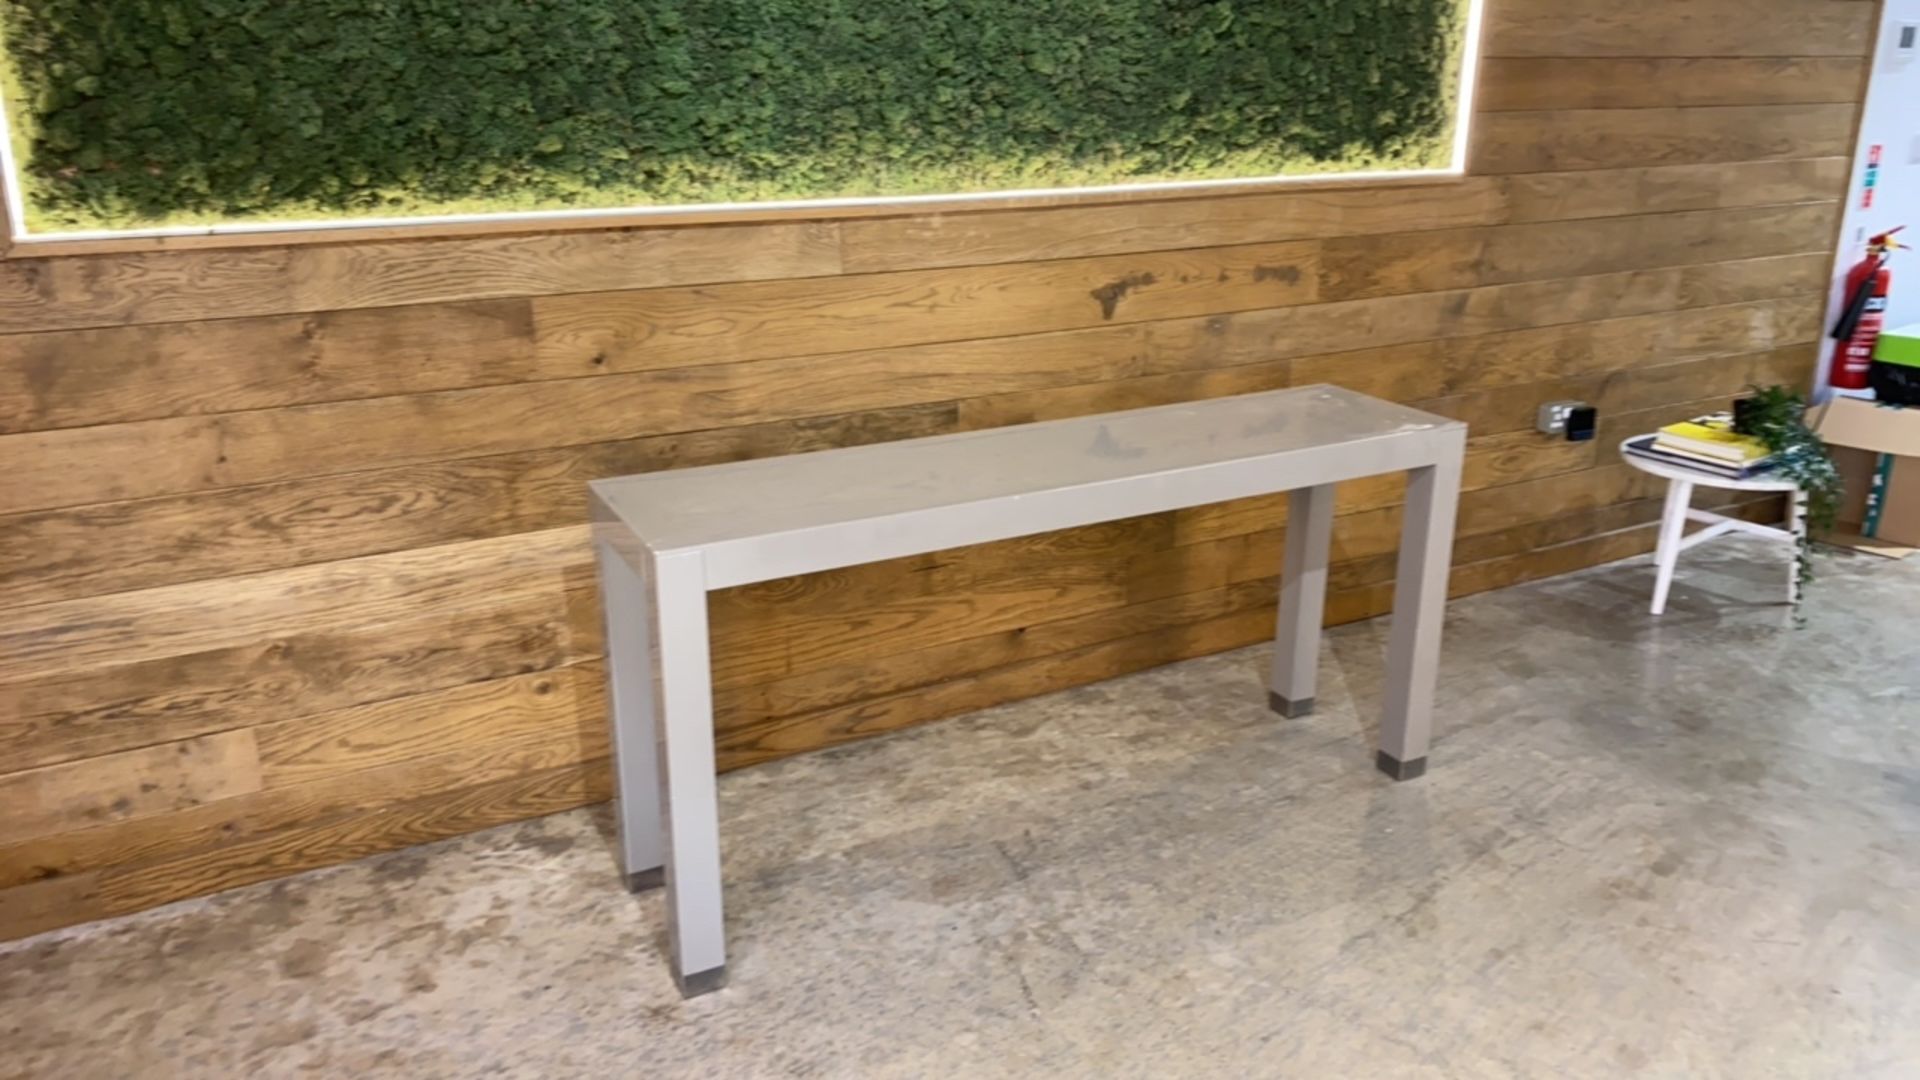 Large Grey wooden Bench Desk With Metal Leg Ends - Image 2 of 6